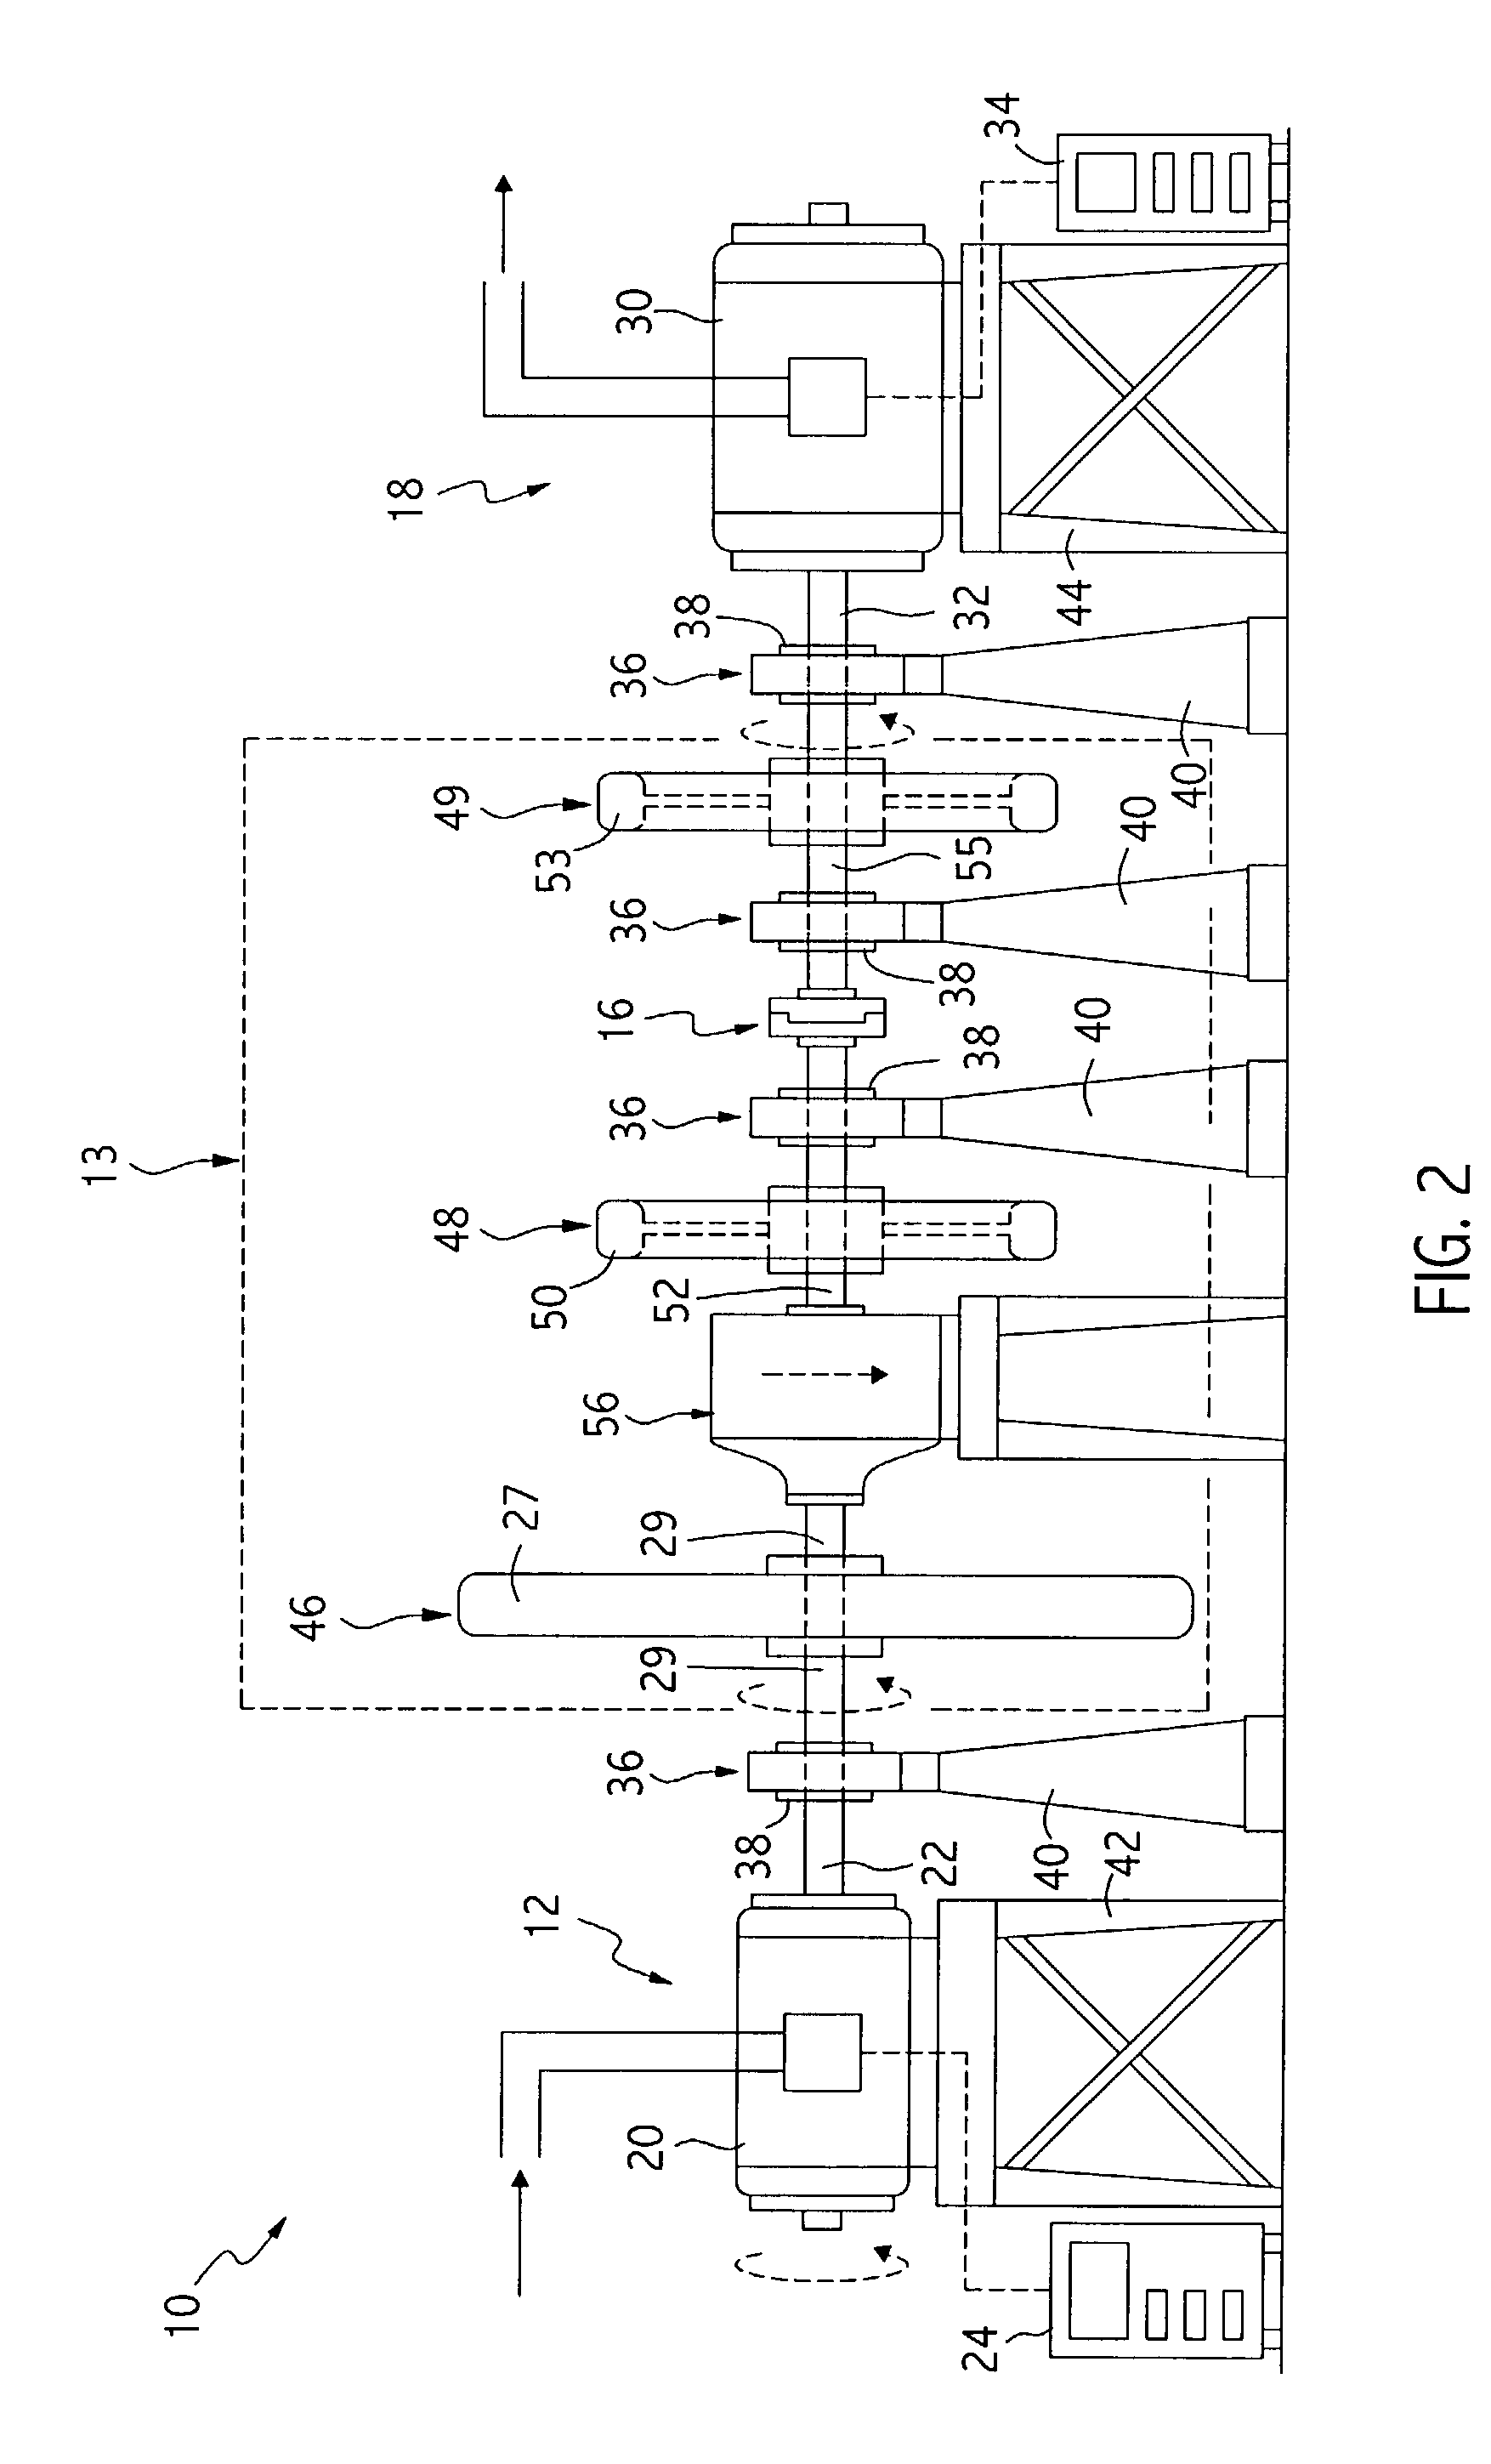 System and method for generating power